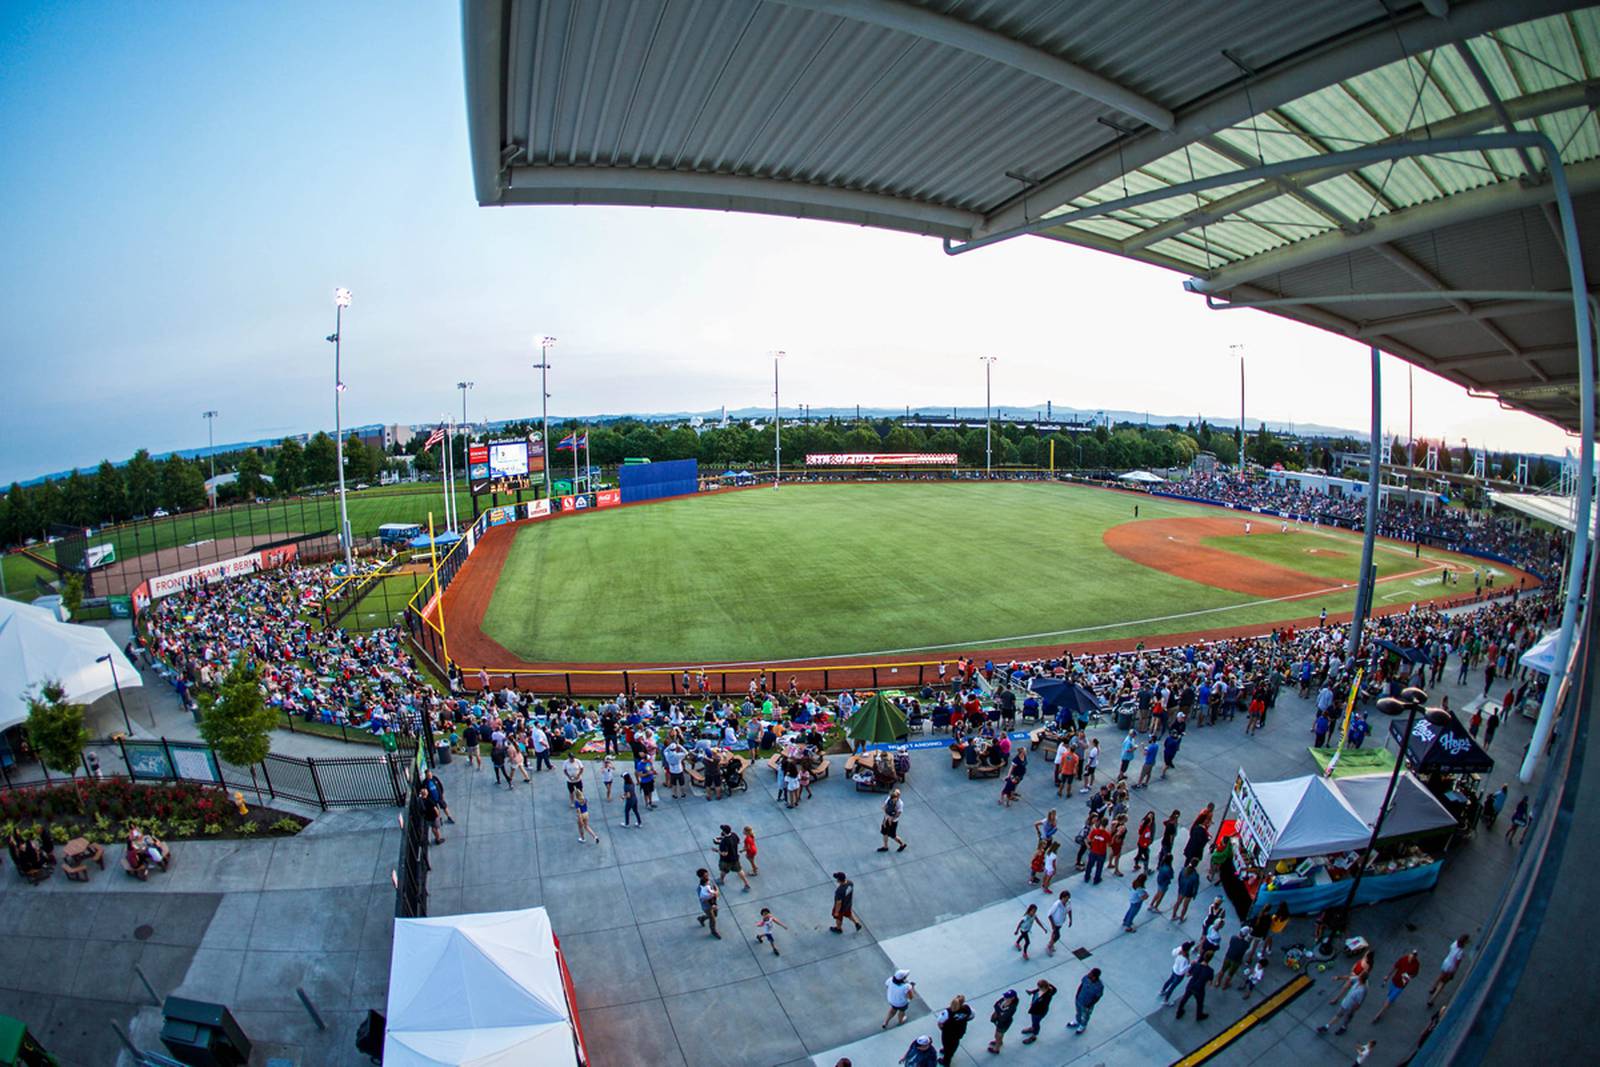 The Hillsboro Hops Are Getting a New, Larger Stadium